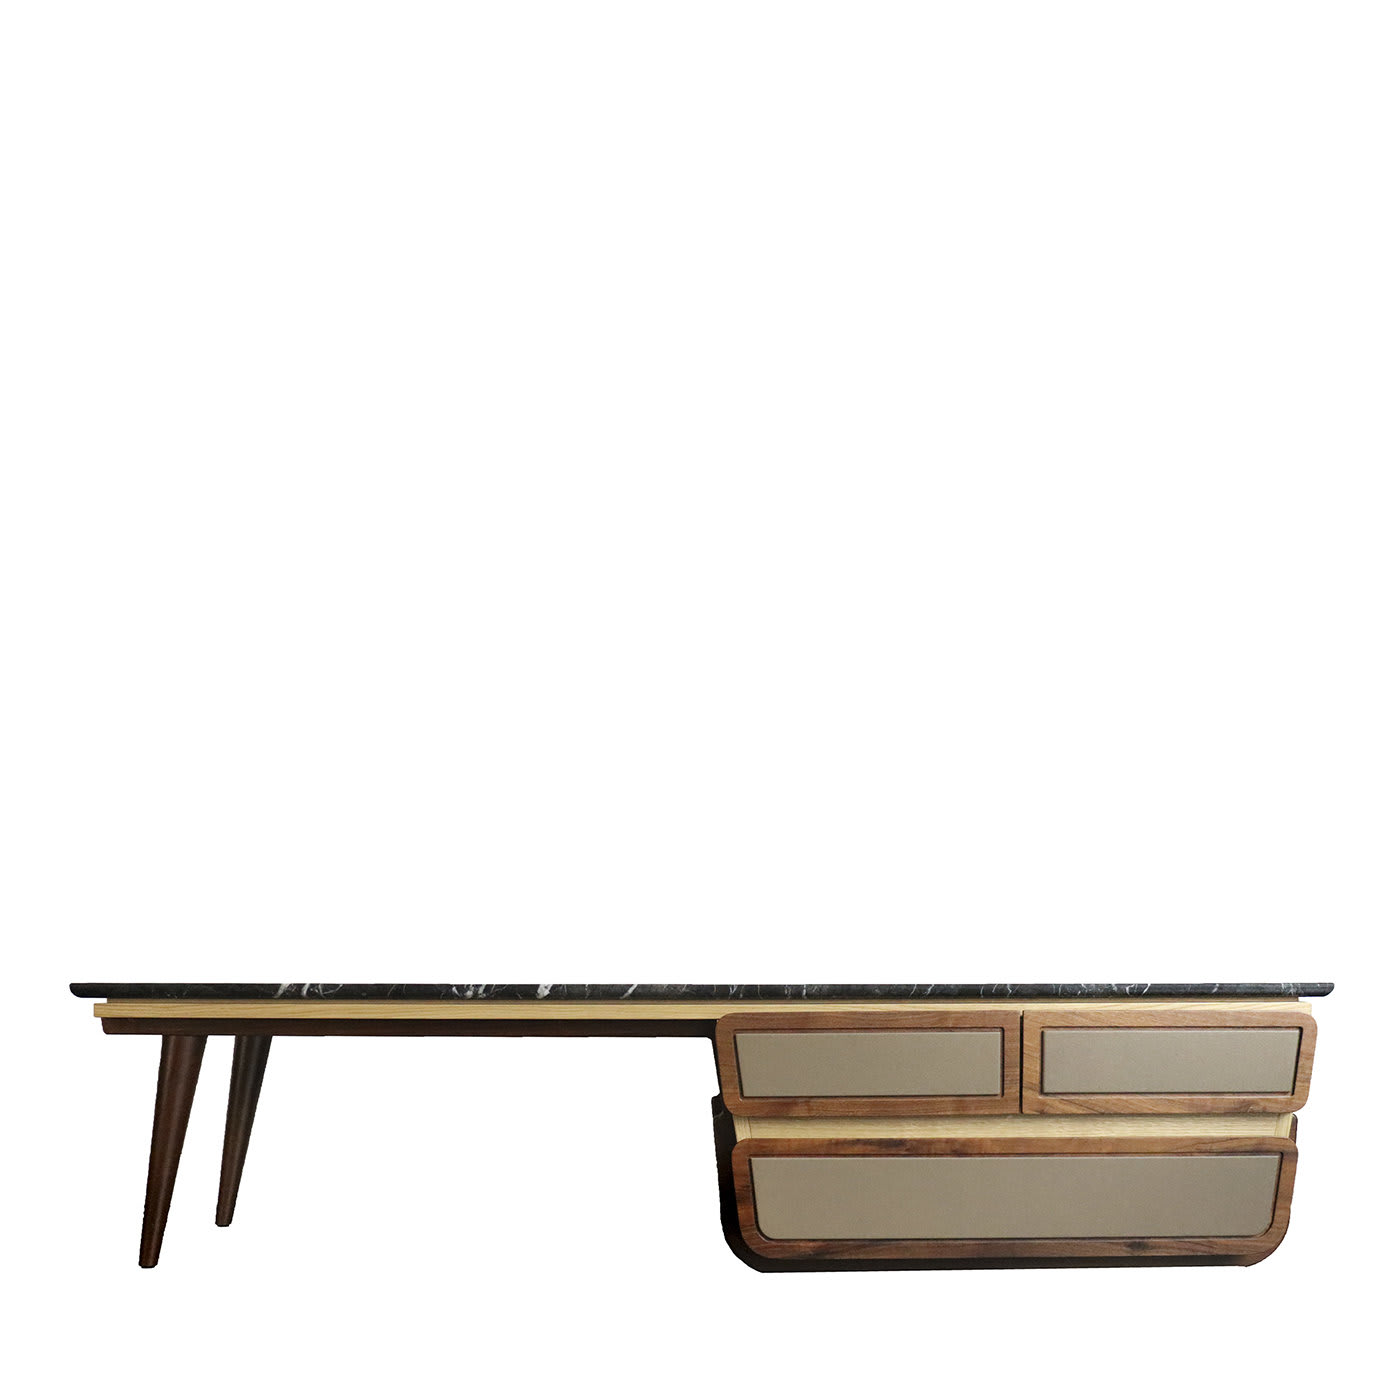 Fai M03 Bench with Drawers by Naji Mourani - 2K1M